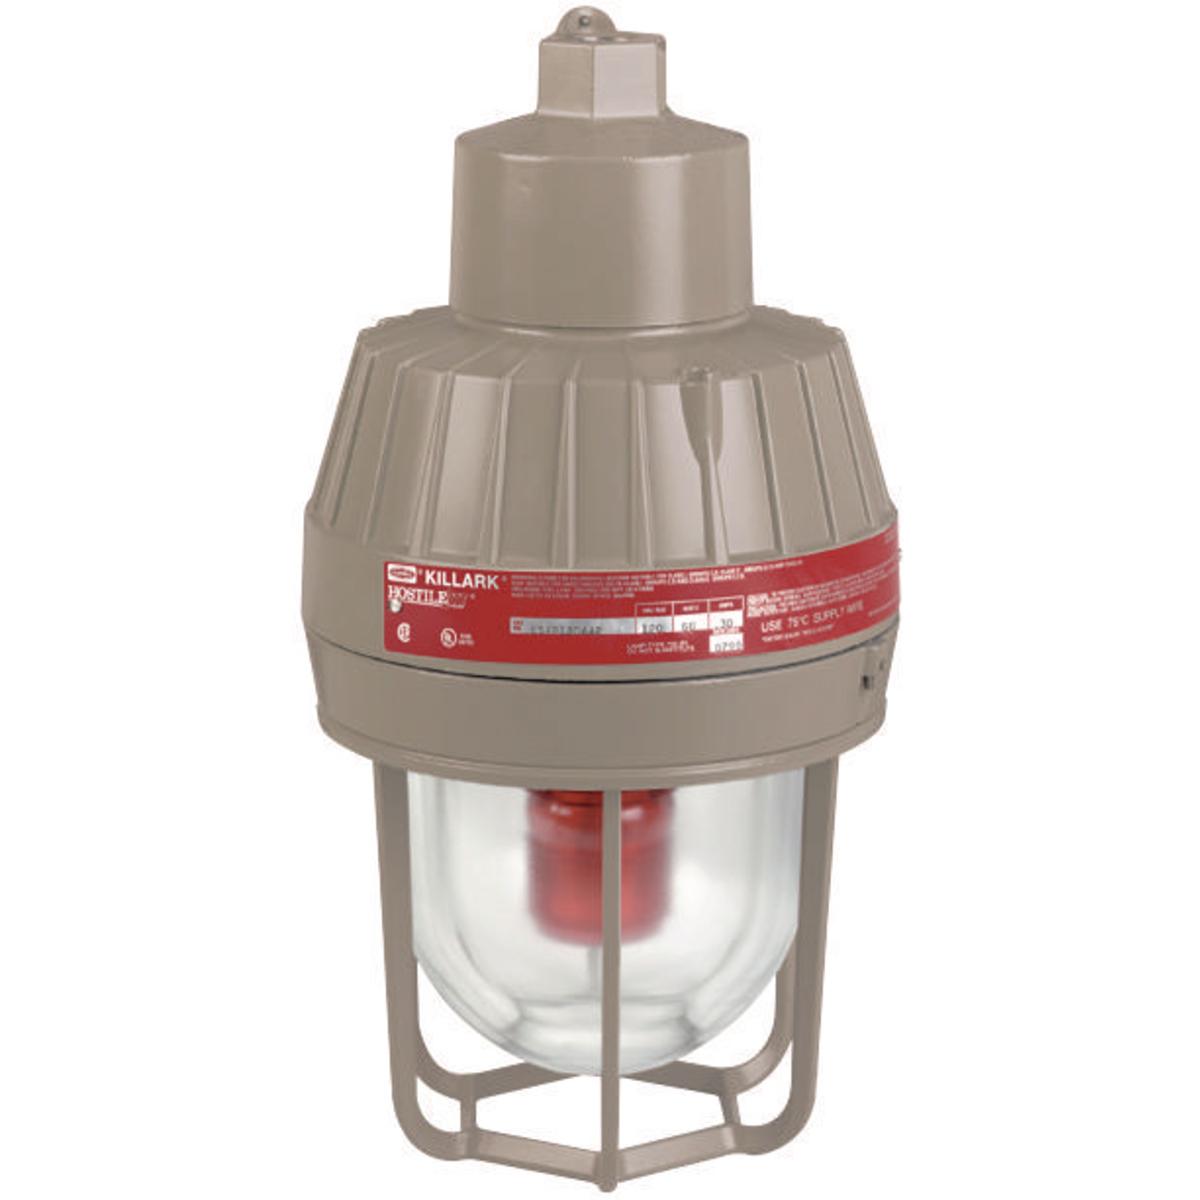 Hubbell ESXR240AA2 CEN 240V Red Strobe, 3/4" Pendant, ATEX Rated  ; Electronic component temperature range –40˚C to +55˚C ; NEC temperature code, T6 ( ; Flash rate–85 flashes per minute ; Xenon type lamp ; Voltage and amperage: 12-74 VDC: Draws 1.25A avg. @ 12 VDC tapering to 0